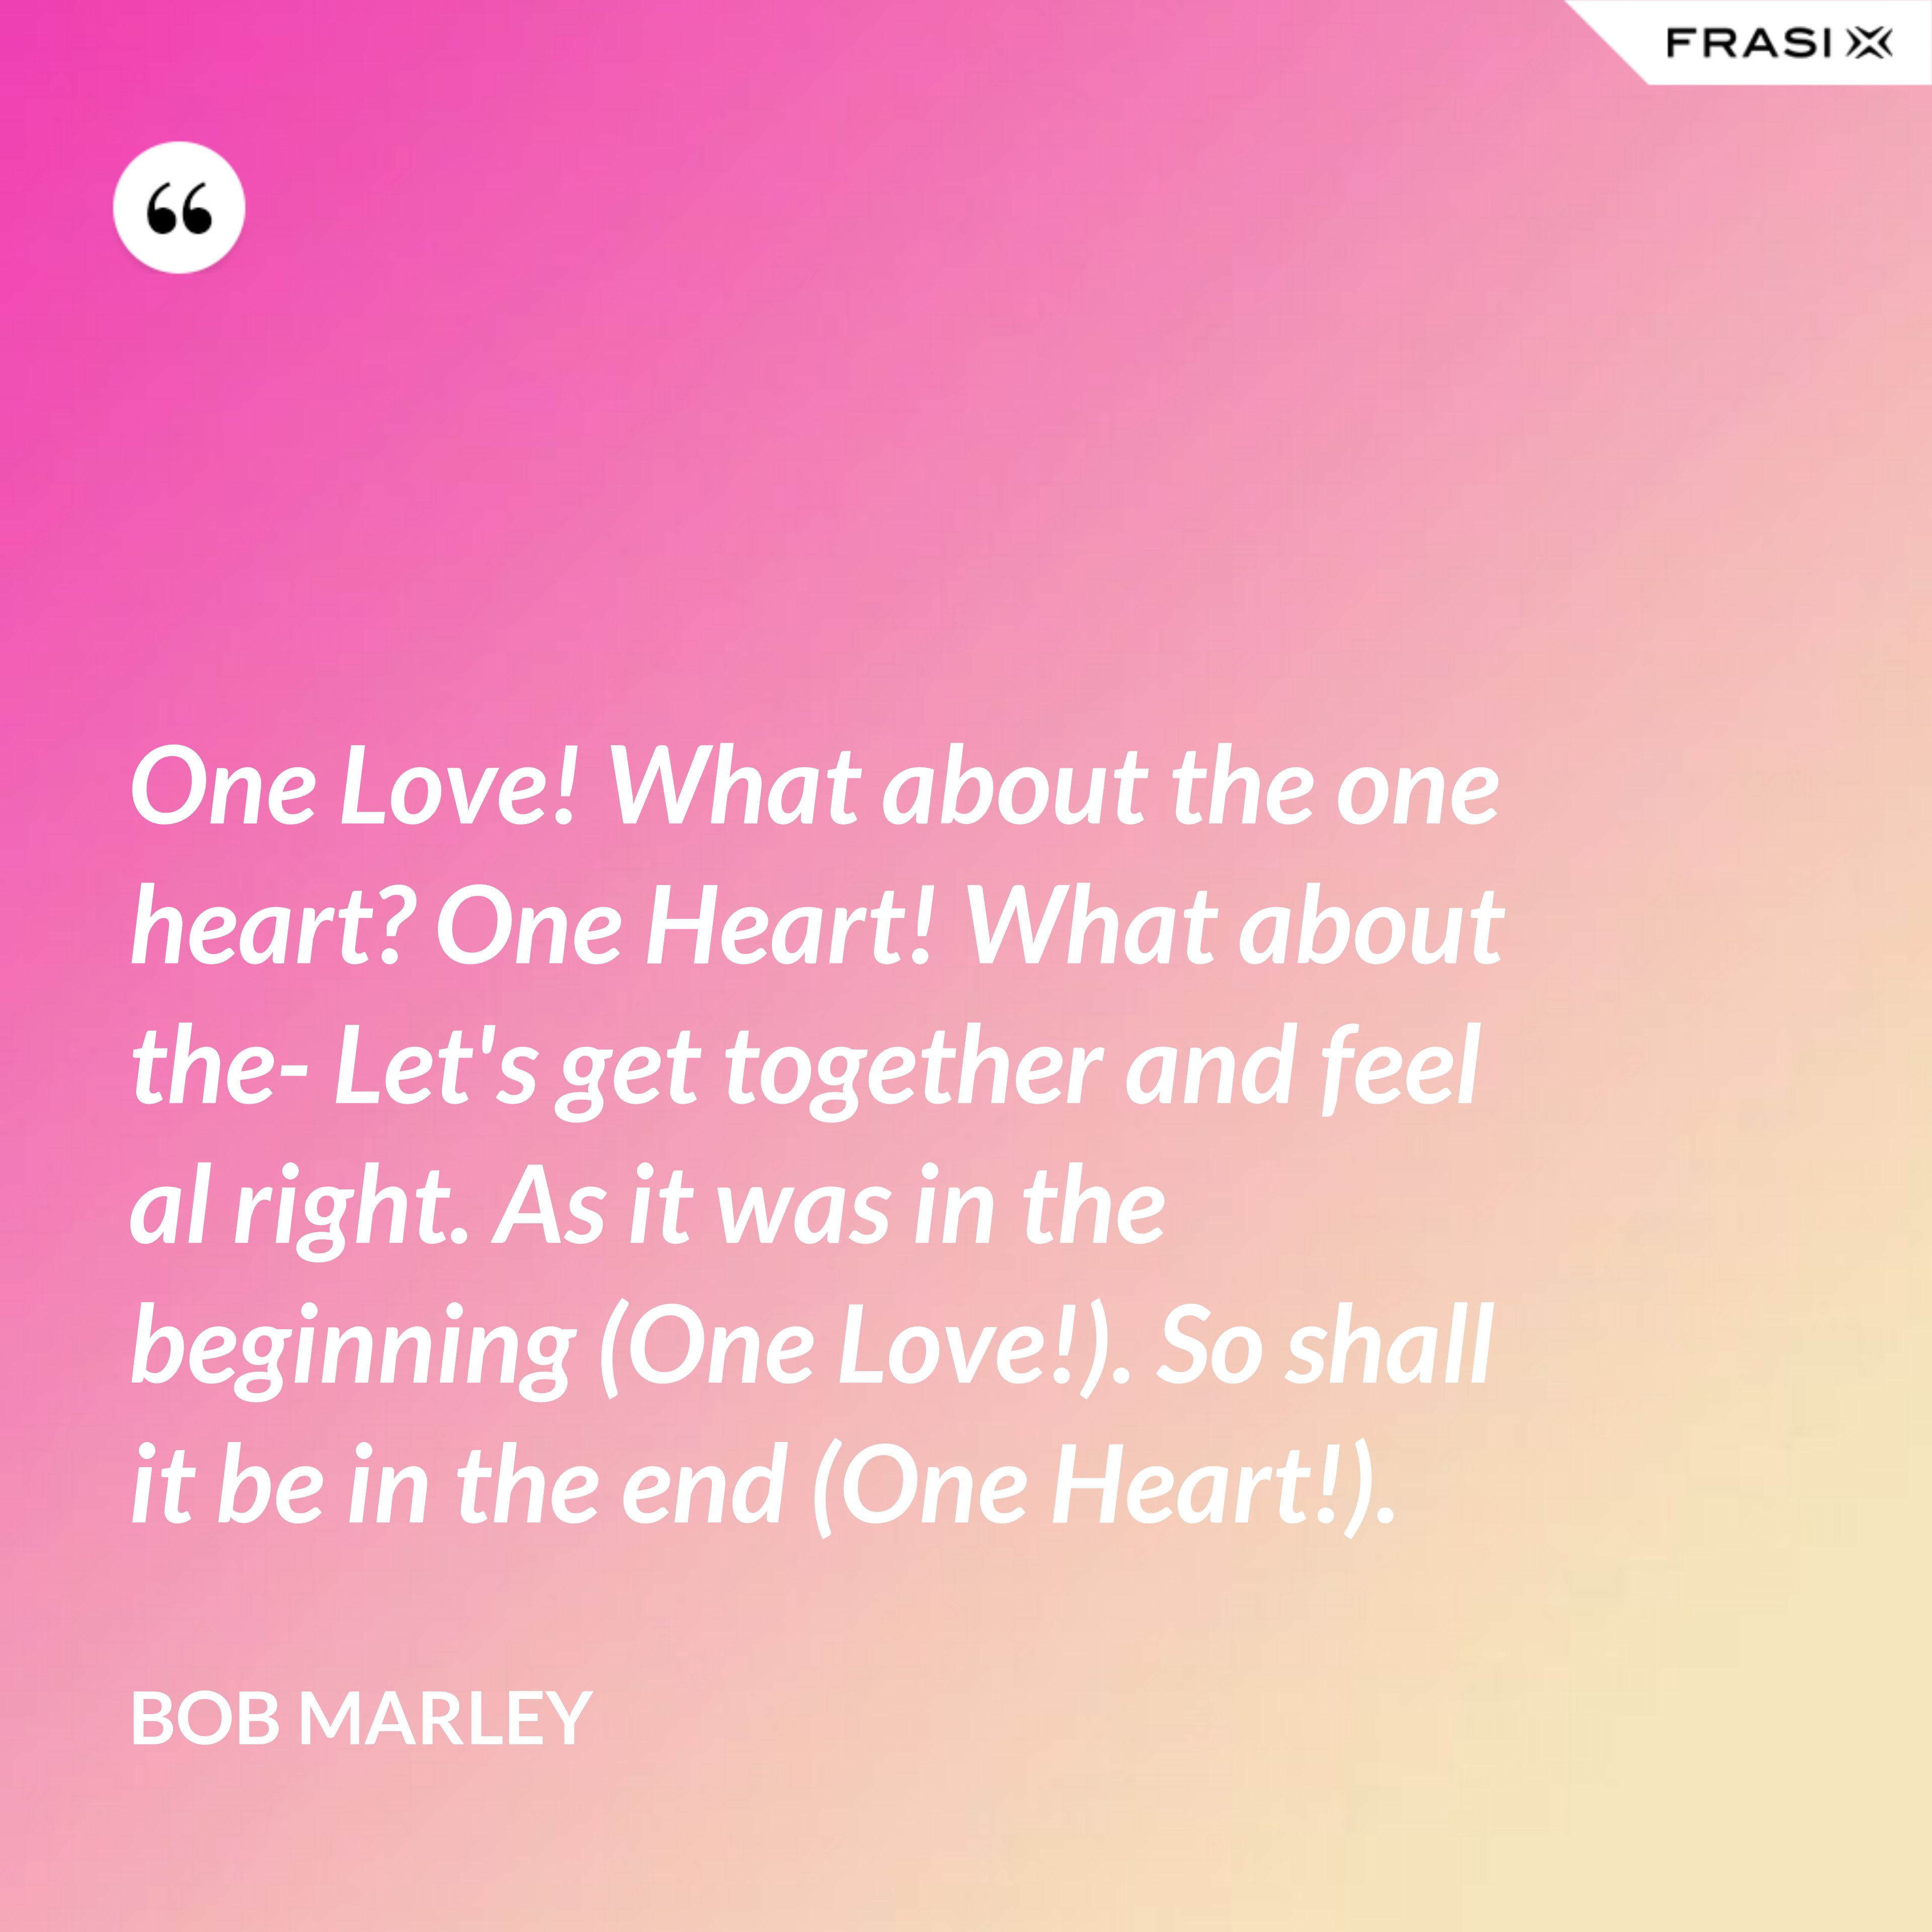 One Love! What about the one heart? One Heart! What about the- Let's get together and feel al right. As it was in the beginning (One Love!). So shall it be in the end (One Heart!). - Bob Marley